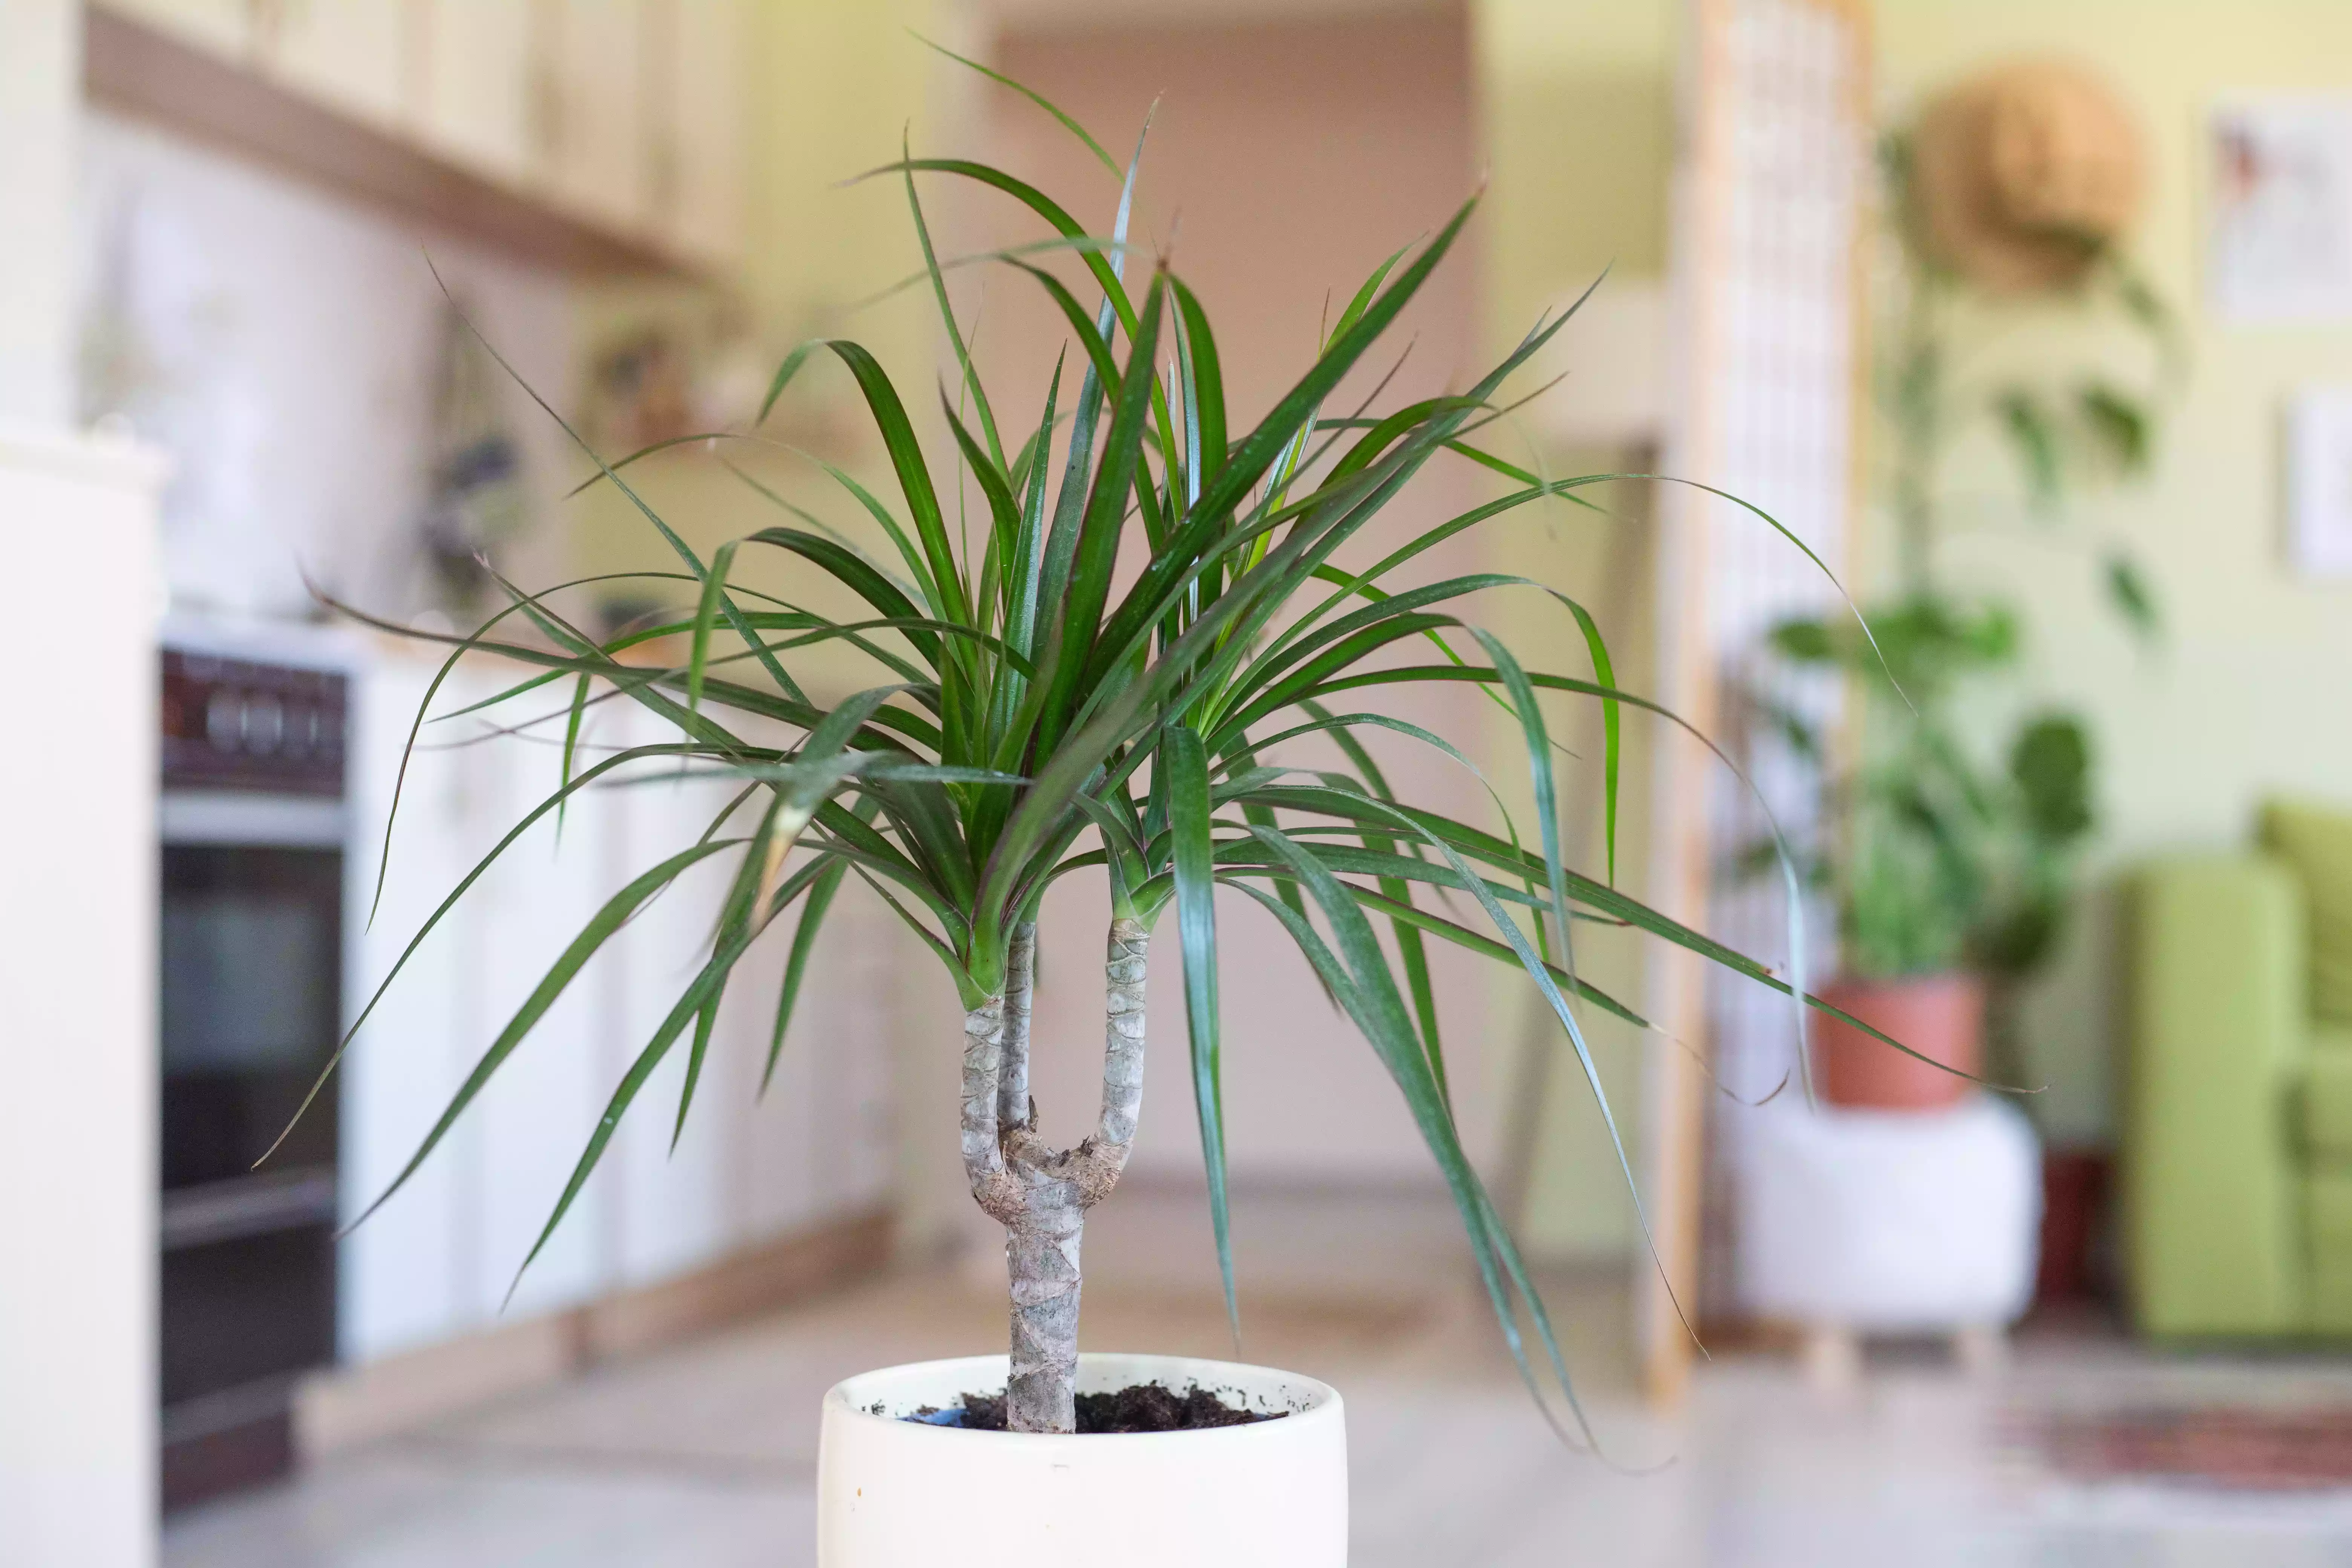 Dracaena house plant in white pot with studio apartment kitchen in background